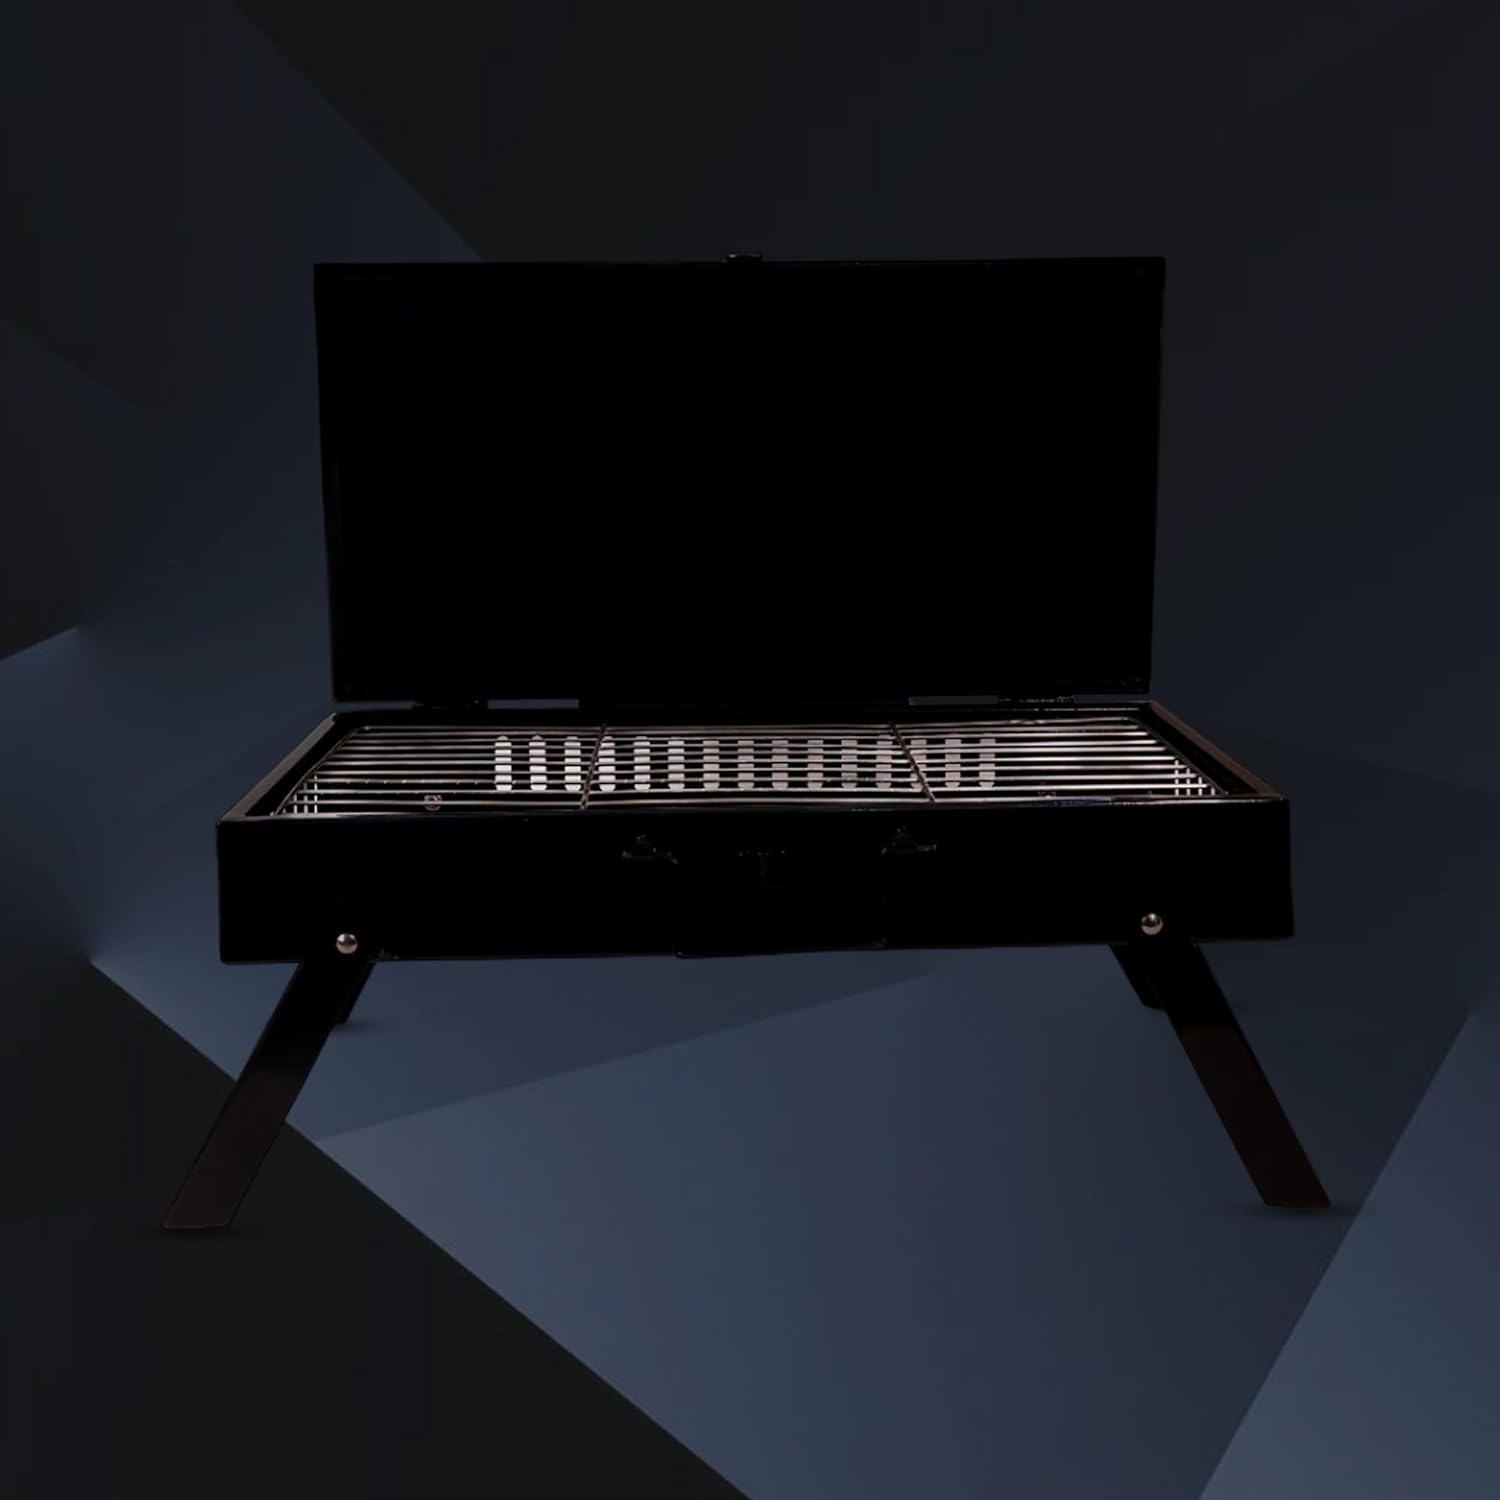 GrillPorter Briefcase Barbeque with Lid and Accessories | Barbeque with 6 skewers, Tong, &Wooden Cleaning Brush